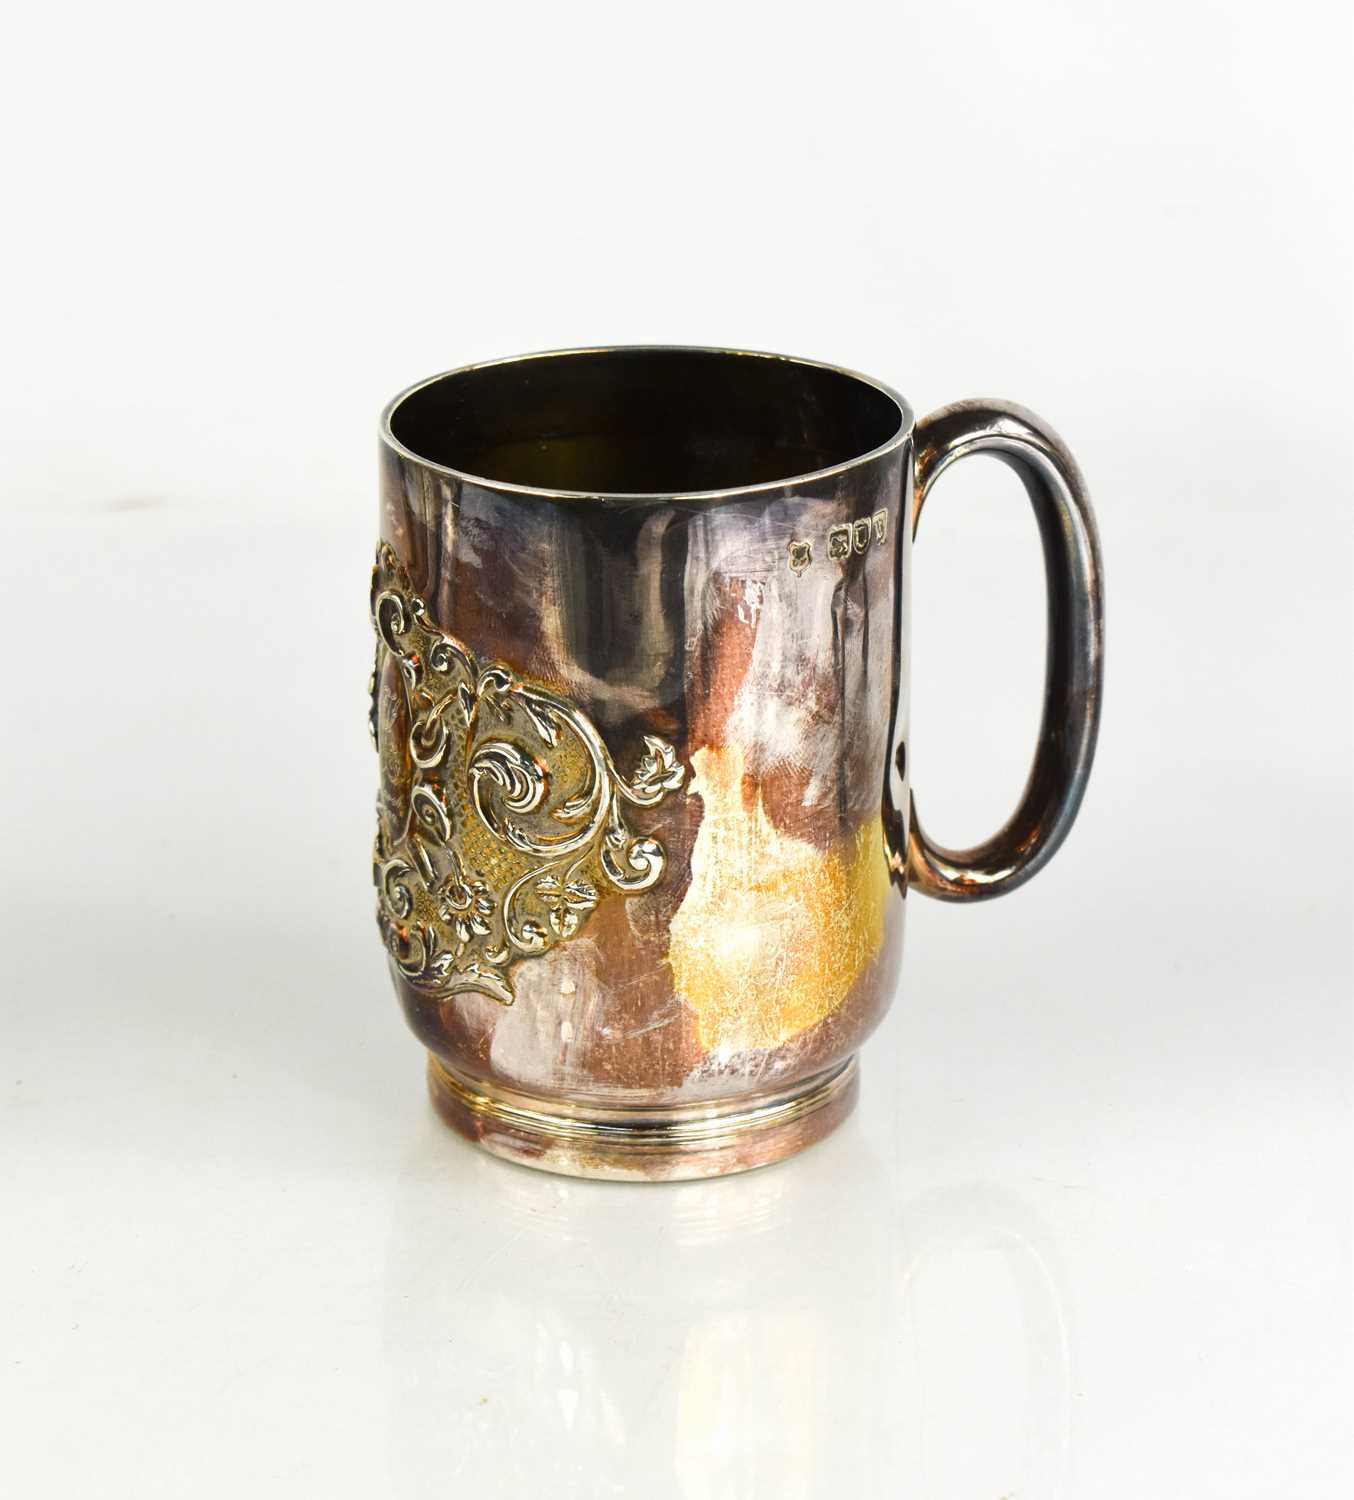 A silver mug, embossed with a crest and engraved with a monogram and dated 21st March 1900, London